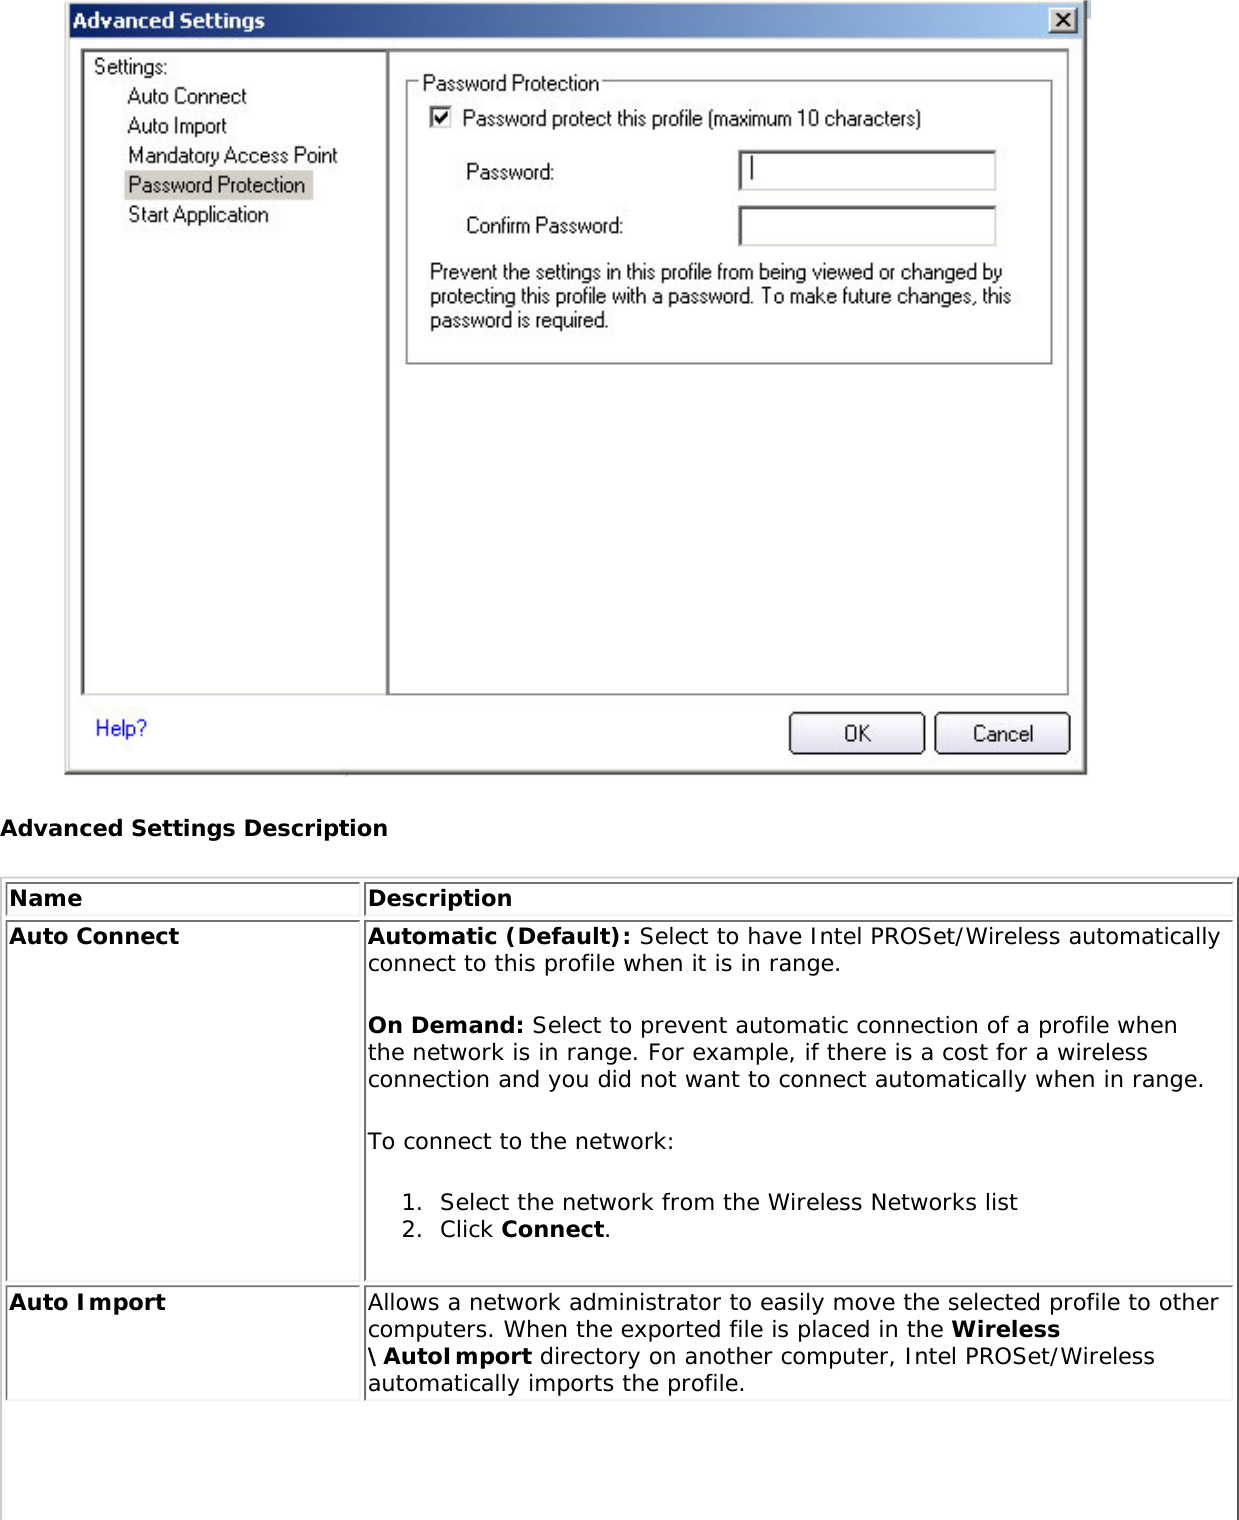  Advanced Settings DescriptionName DescriptionAuto Connect Automatic (Default): Select to have Intel PROSet/Wireless automatically connect to this profile when it is in range. On Demand: Select to prevent automatic connection of a profile when the network is in range. For example, if there is a cost for a wireless connection and you did not want to connect automatically when in range. To connect to the network: 1.  Select the network from the Wireless Networks list2.  Click Connect. Auto Import  Allows a network administrator to easily move the selected profile to other computers. When the exported file is placed in the Wireless\AutoImport directory on another computer, Intel PROSet/Wireless automatically imports the profile. 